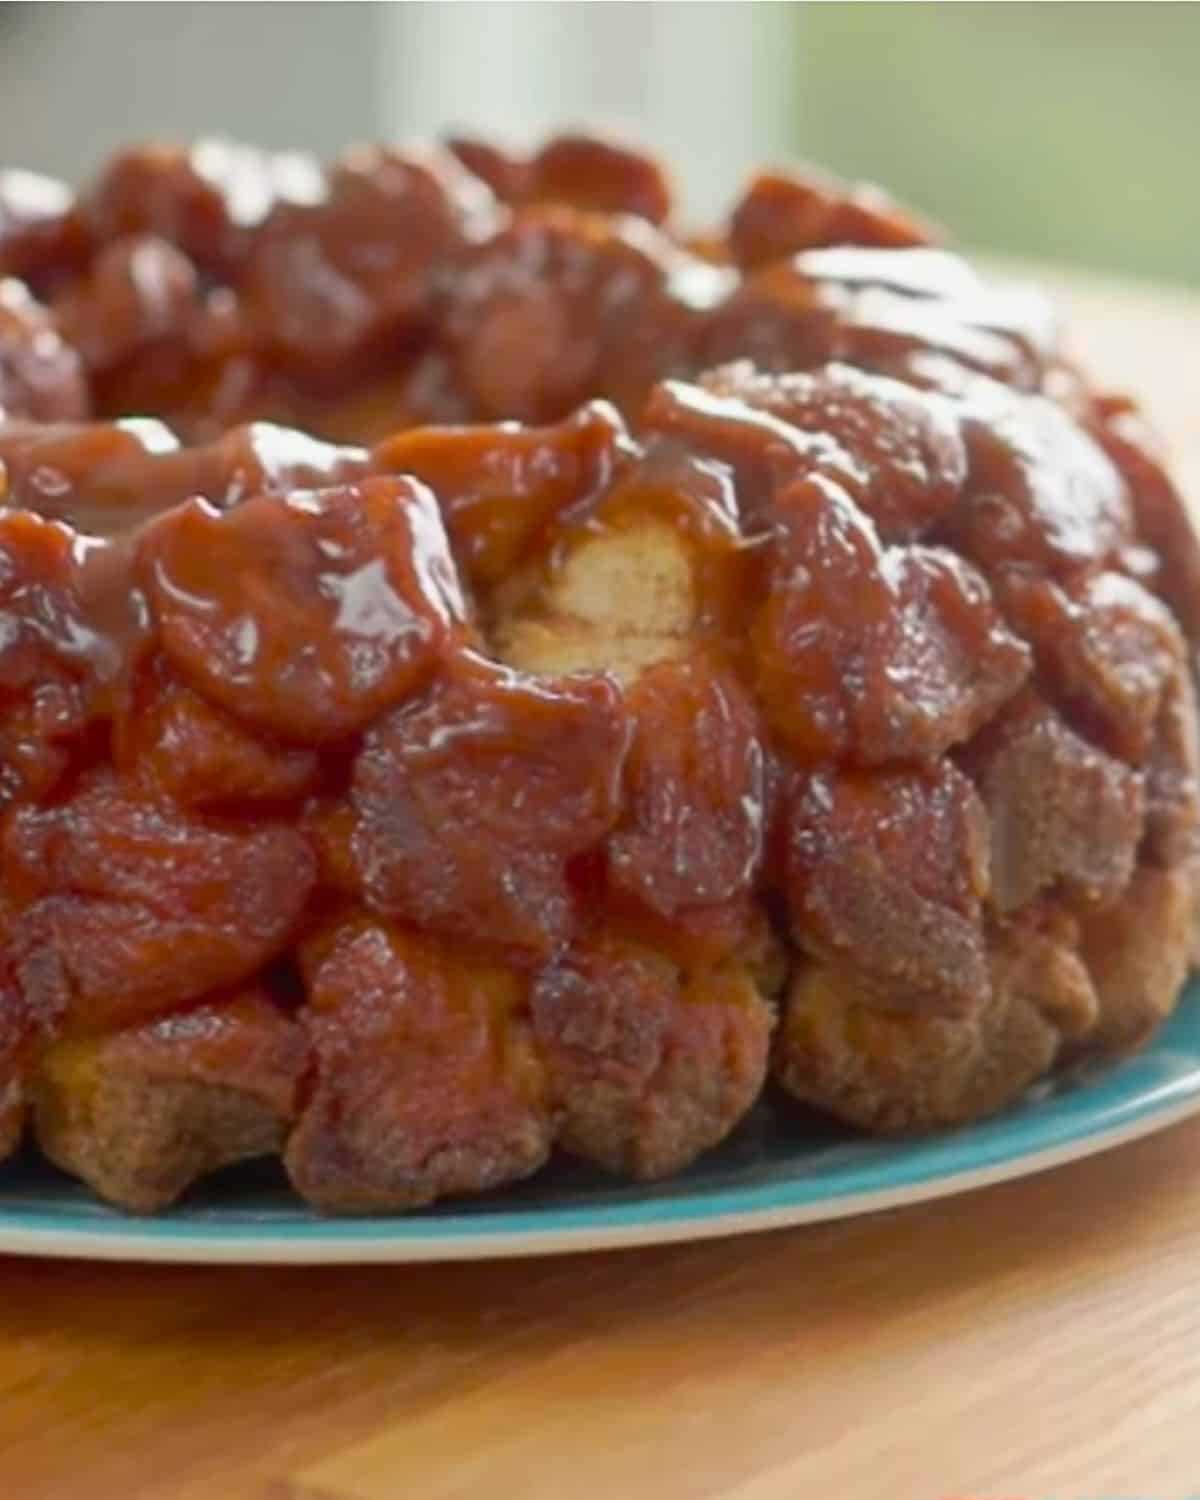 Monkey bread on blue plate with missing piece.